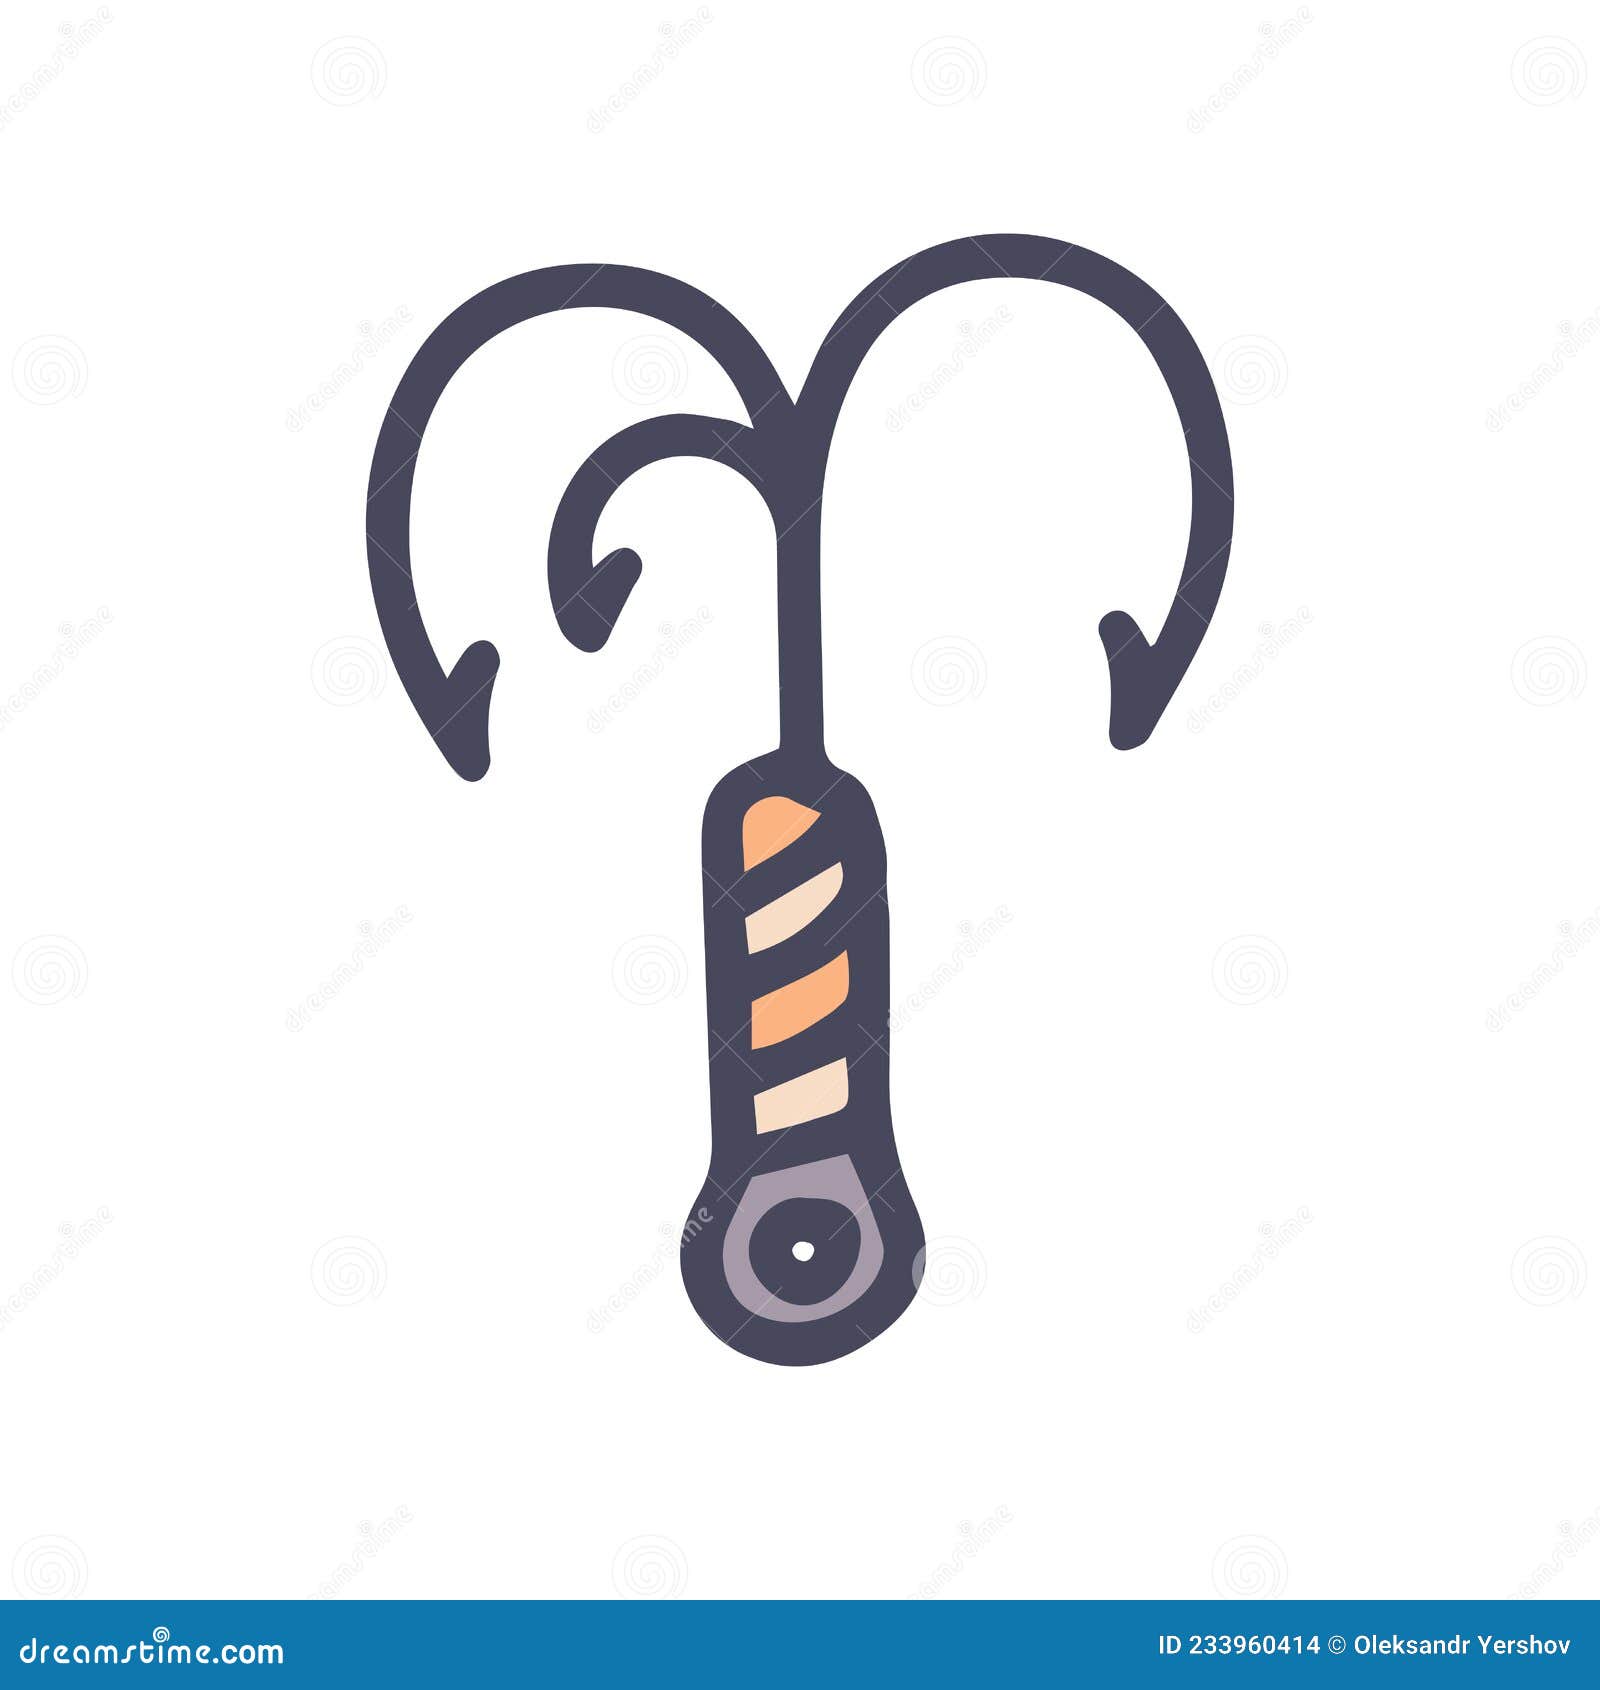 Grappling Hook Color Vector Doodle Simple Icon Stock Vector - Illustration  of activity, handdraw: 233960414